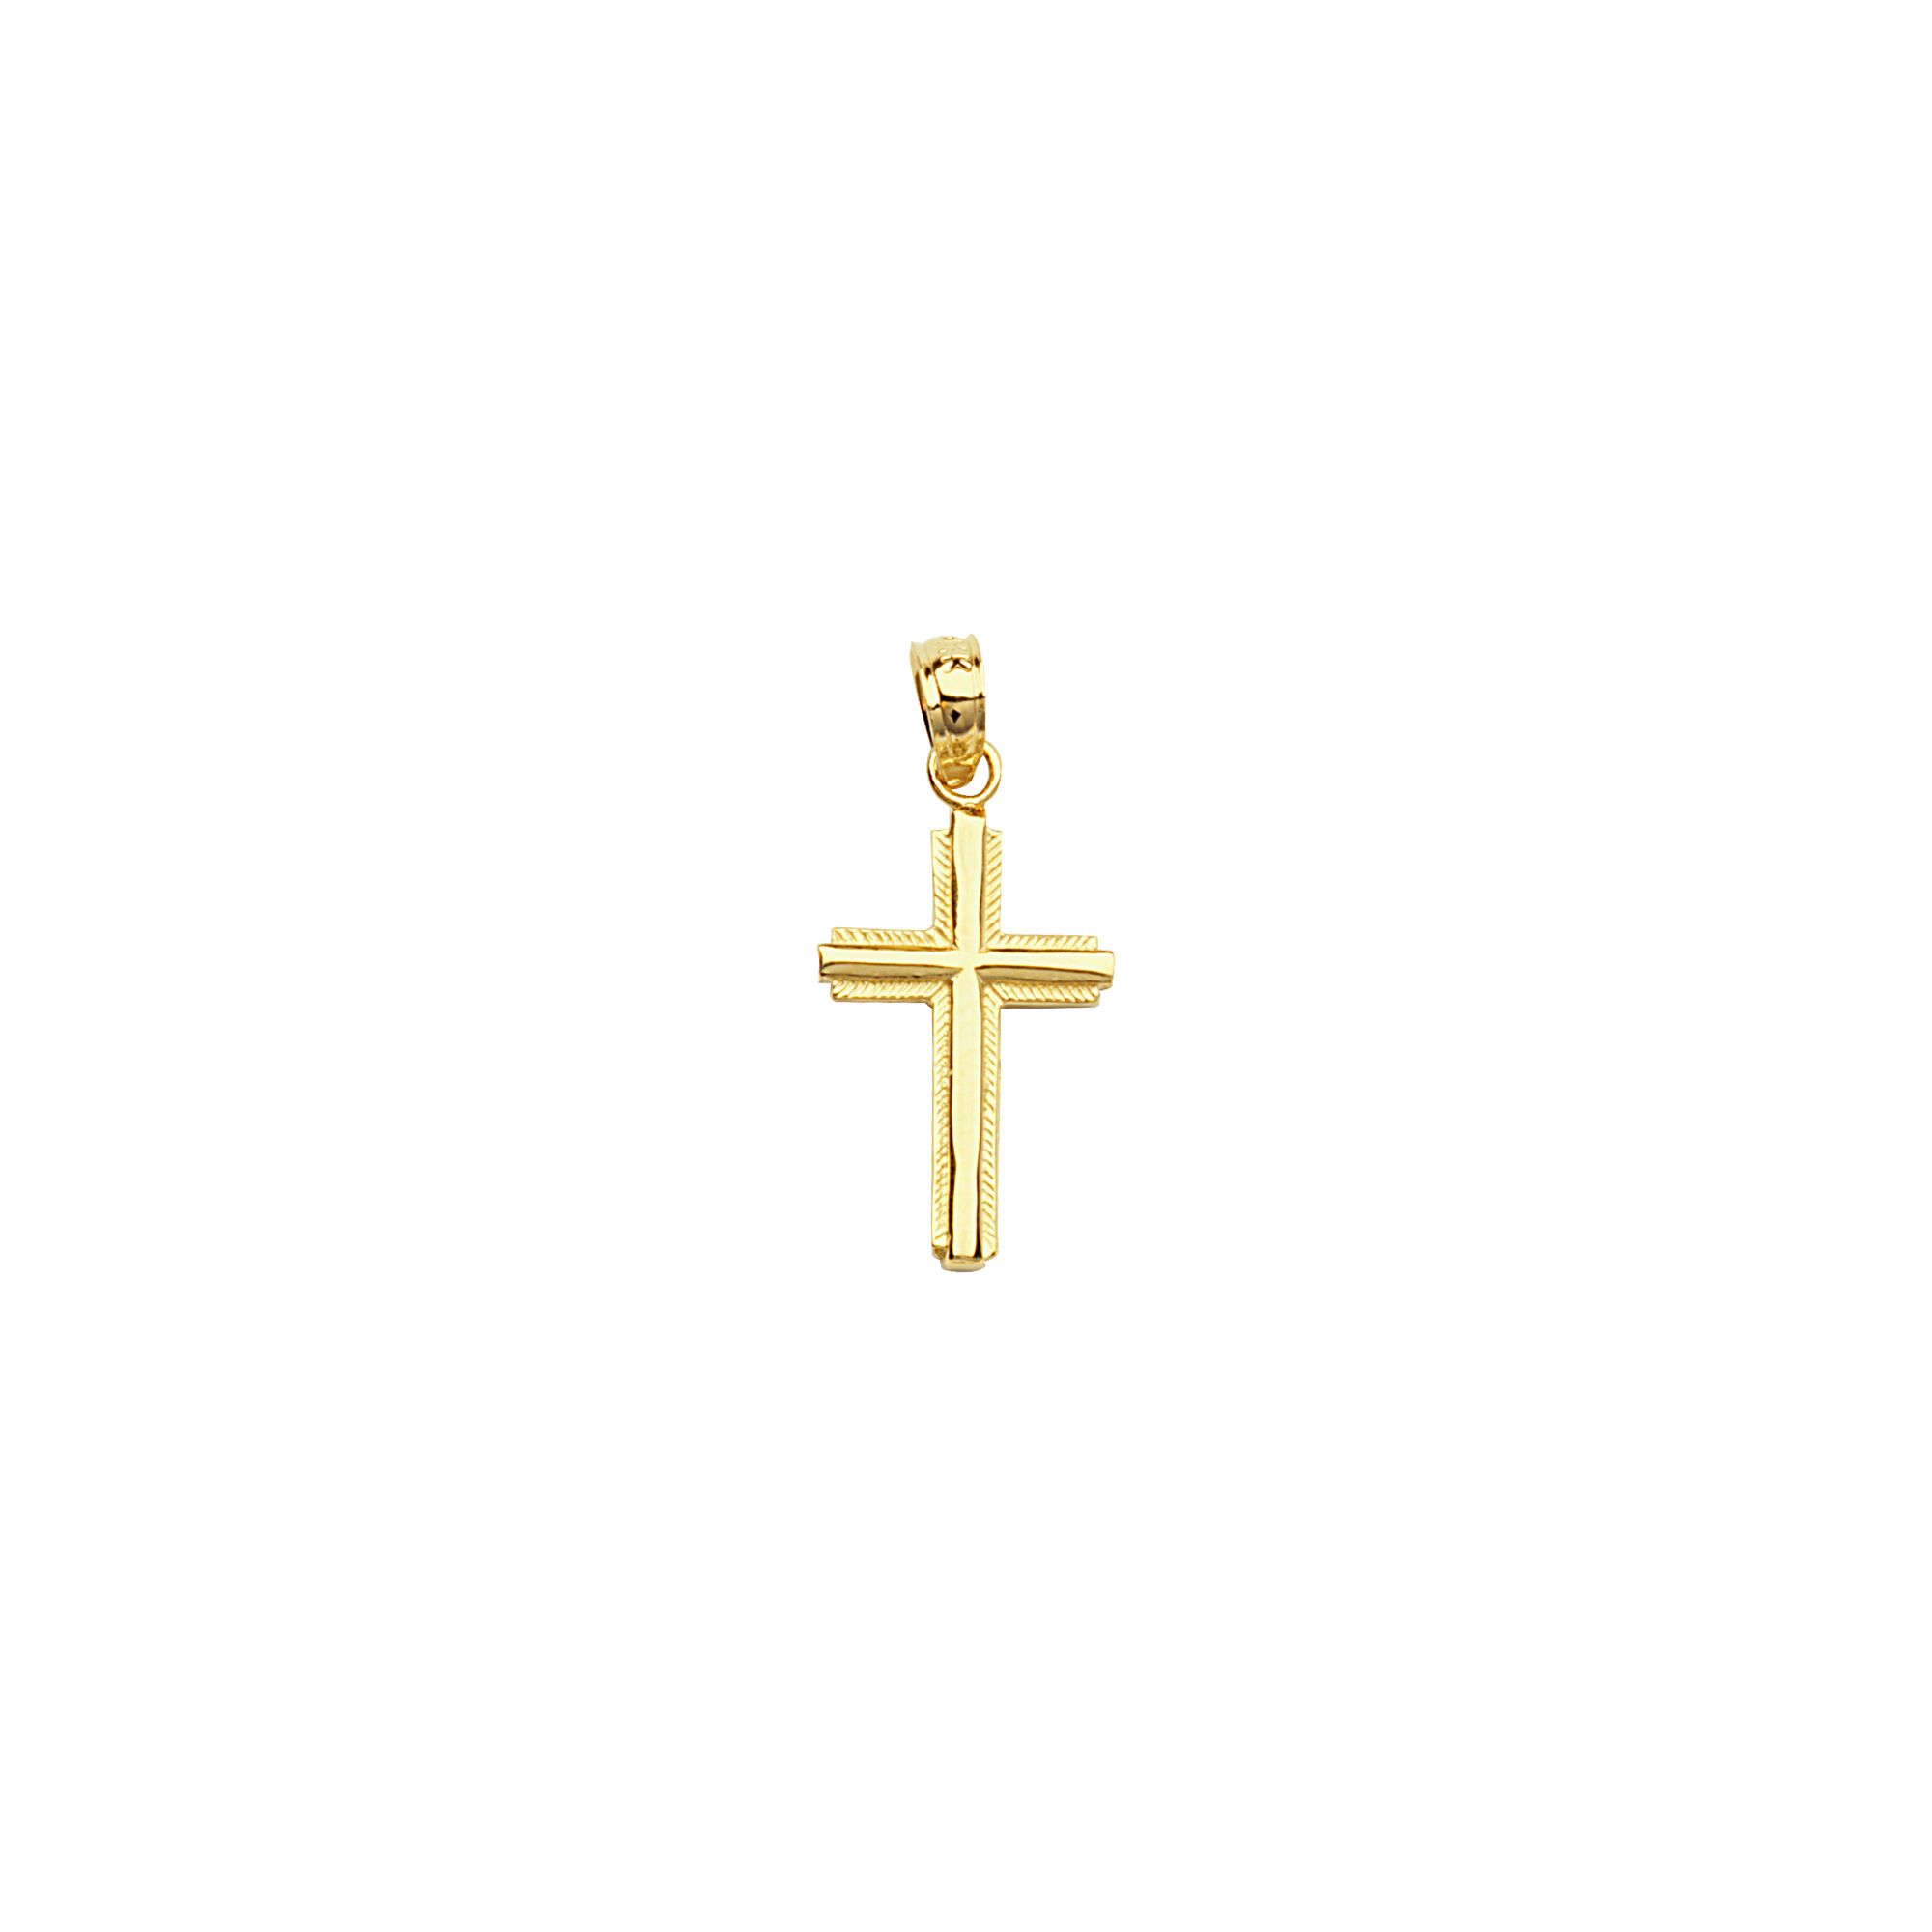 Cross With Stripped Border - KCROS0931